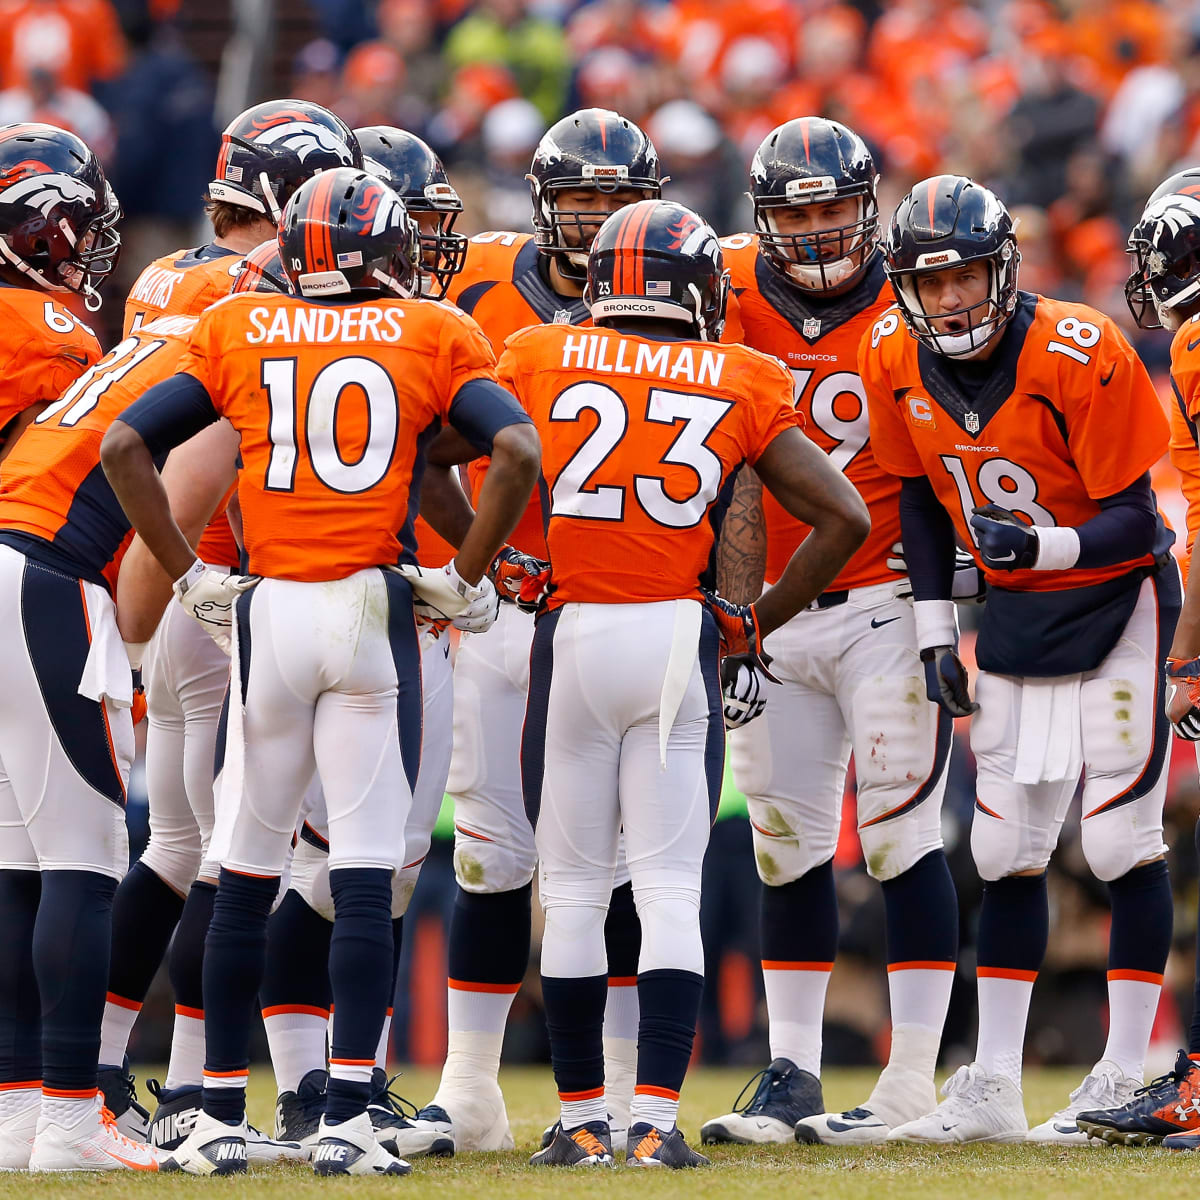 Denver Broncos team bus involved in minor accident - Sports Illustrated